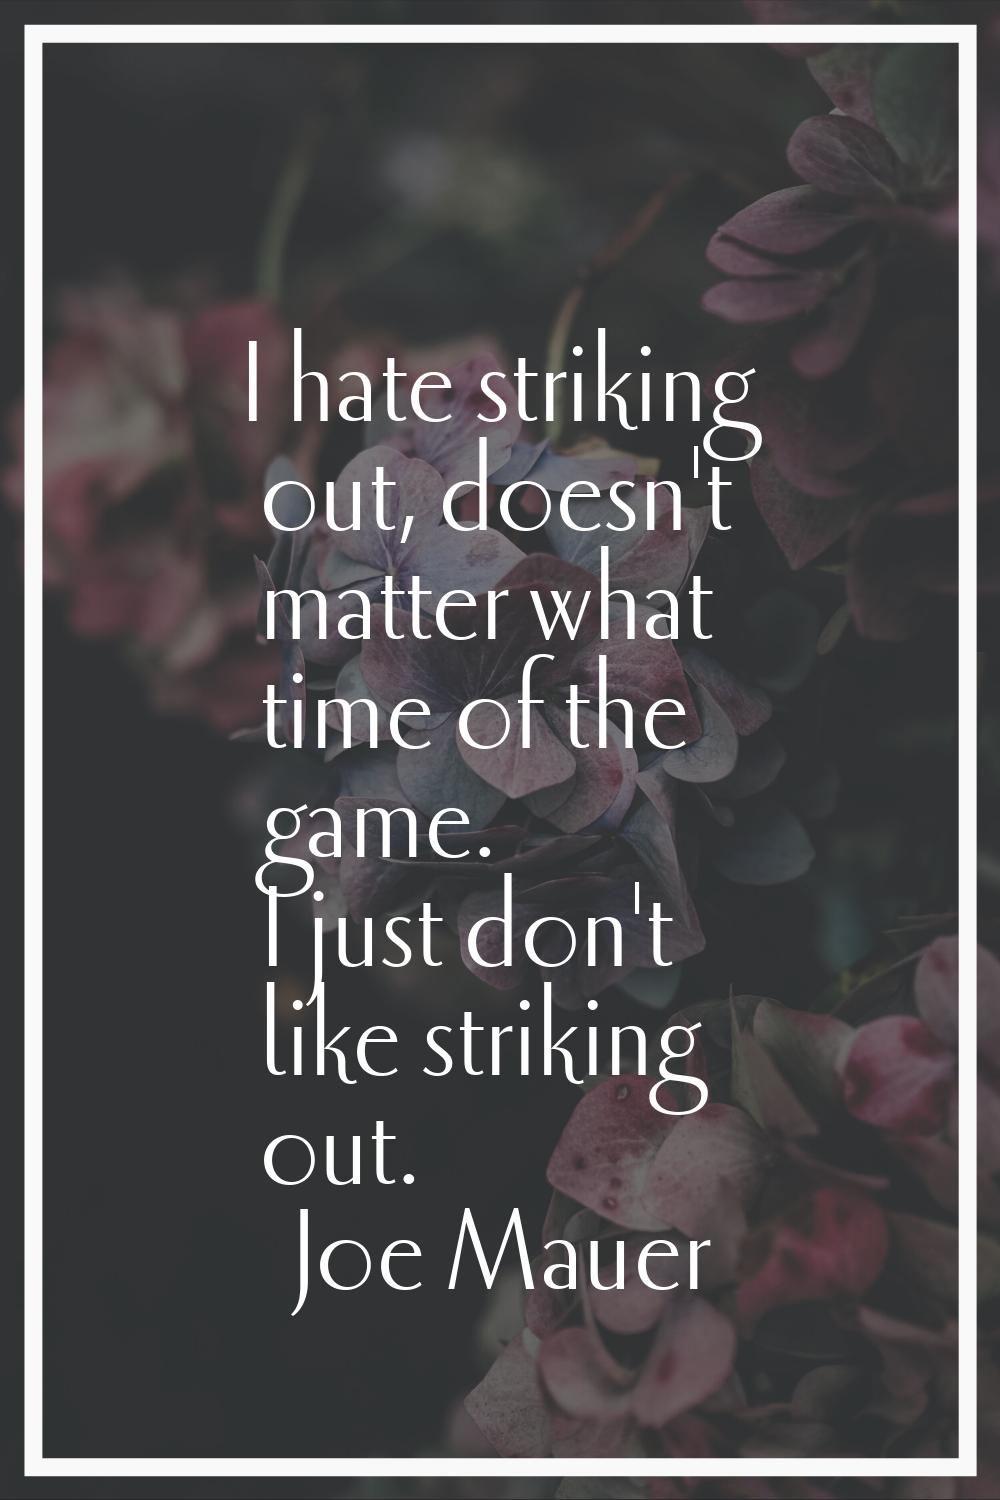 I hate striking out, doesn't matter what time of the game. I just don't like striking out.